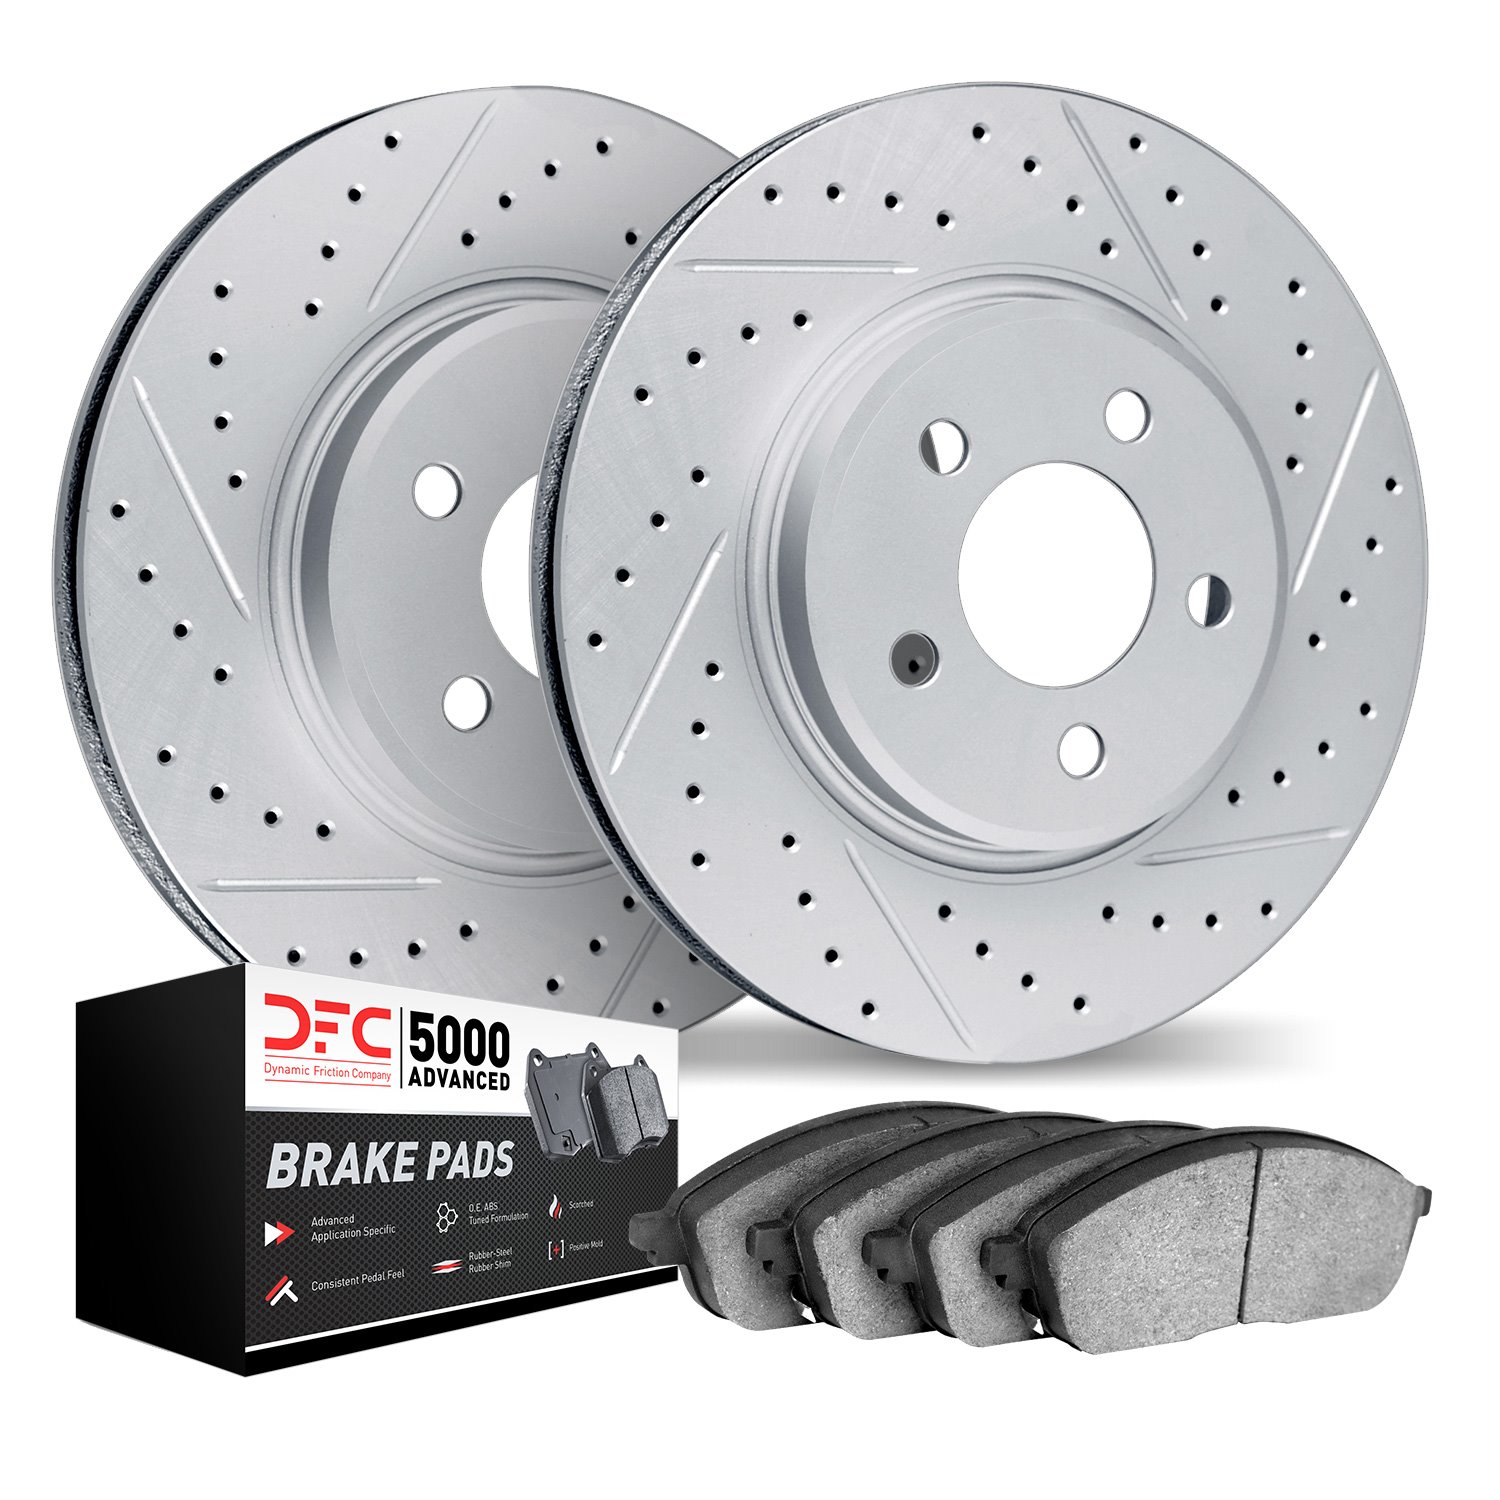 2502-74033 Geoperformance Drilled/Slotted Rotors w/5000 Advanced Brake Pads Kit, 2002-2005 Audi/Volkswagen, Position: Front